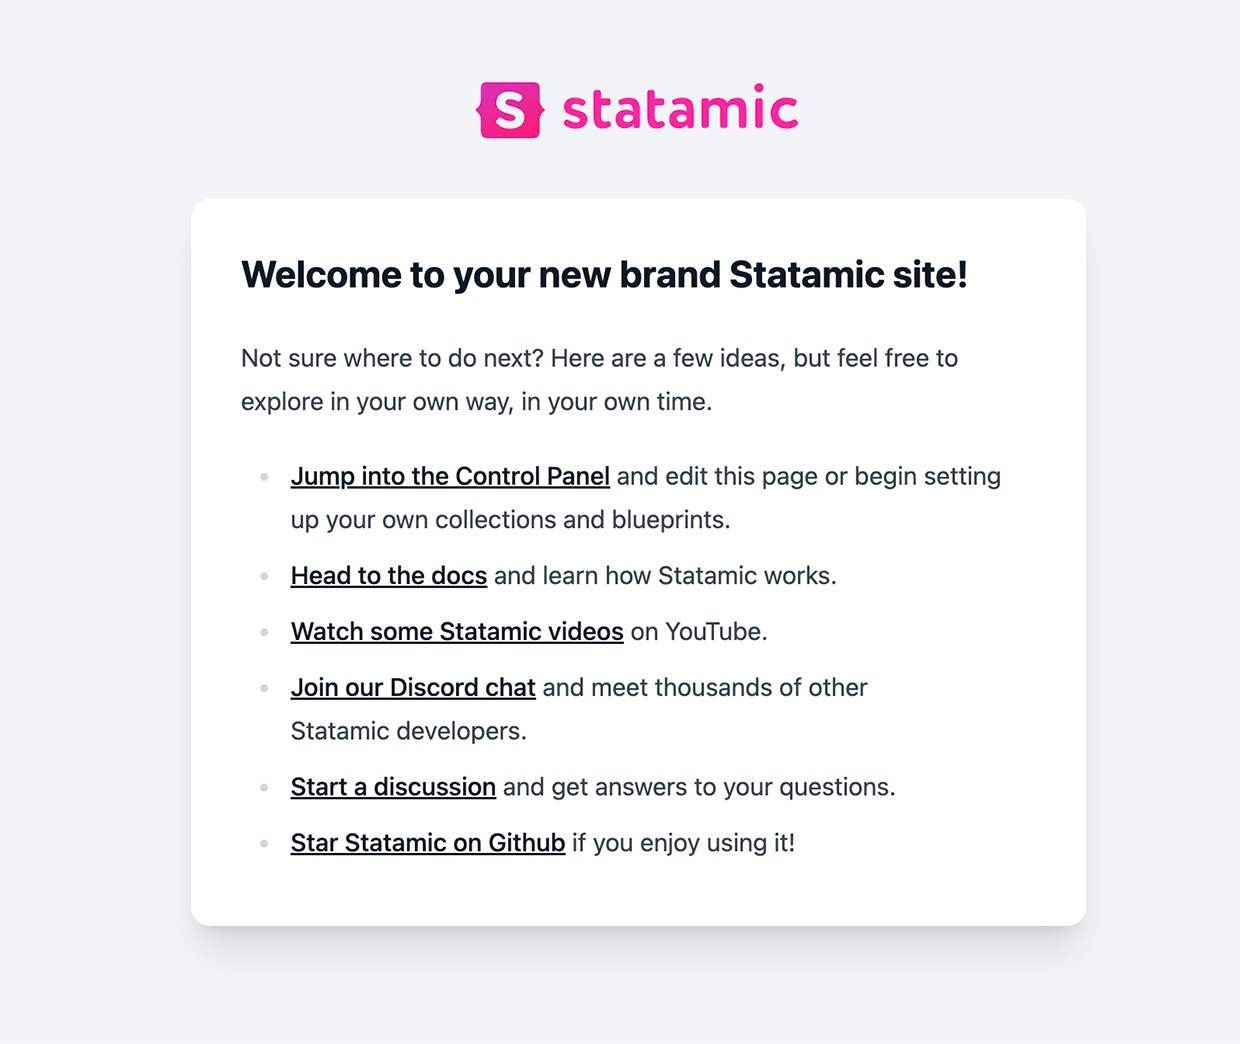 The Statamic Welcome Page